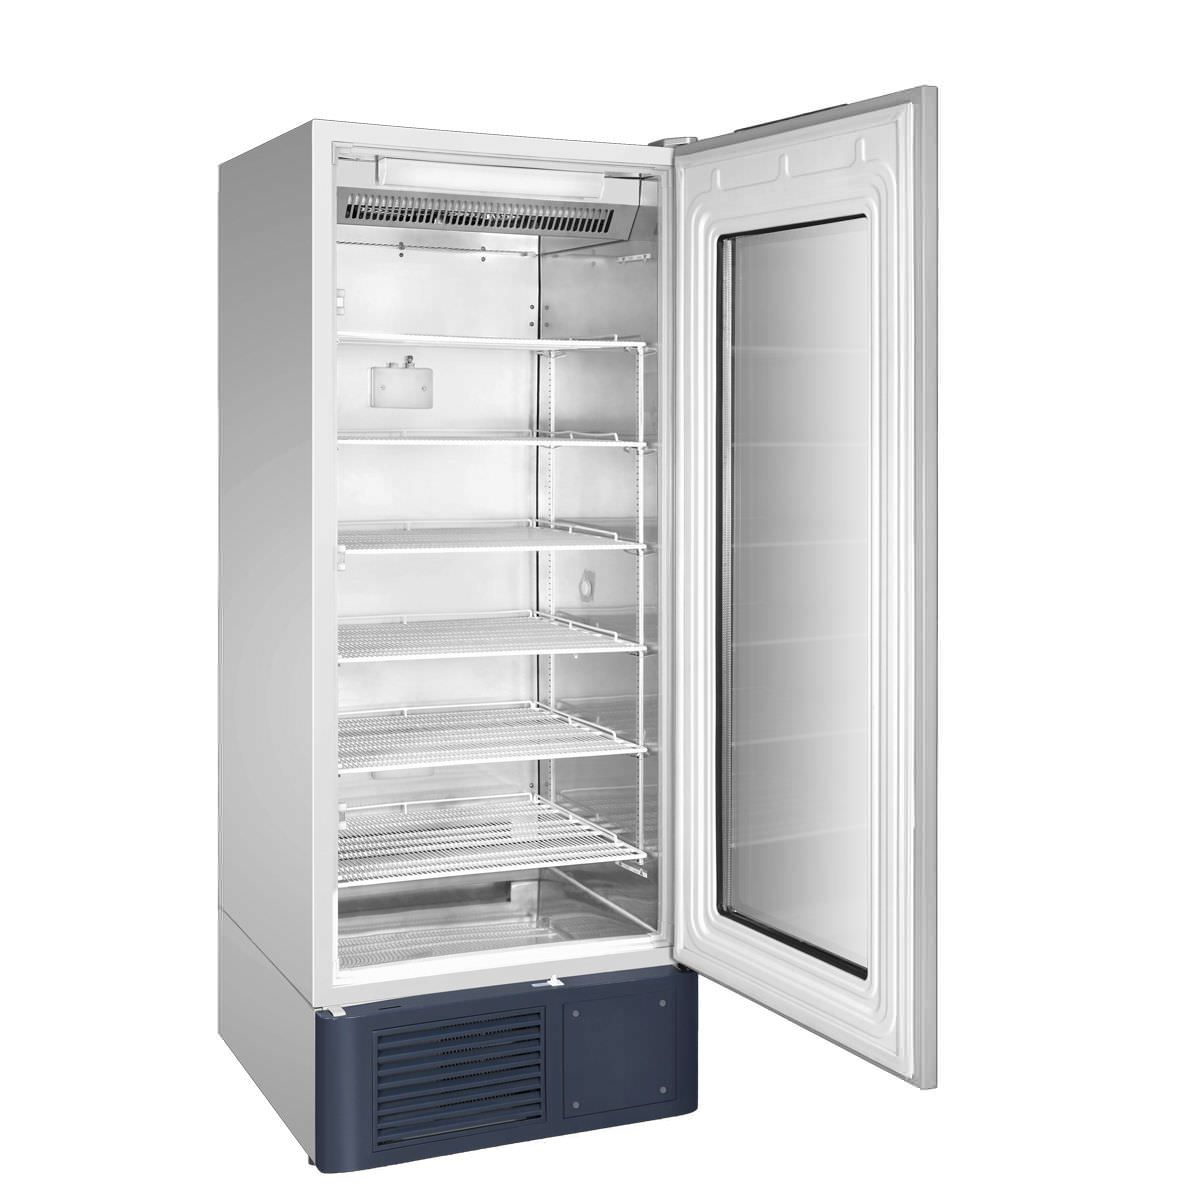 Pharmacy refrigerator / cabinet / 1-door 2 °C ... 8 °C, 610 L | HYC-610 Haier Medical and Laboratory Products